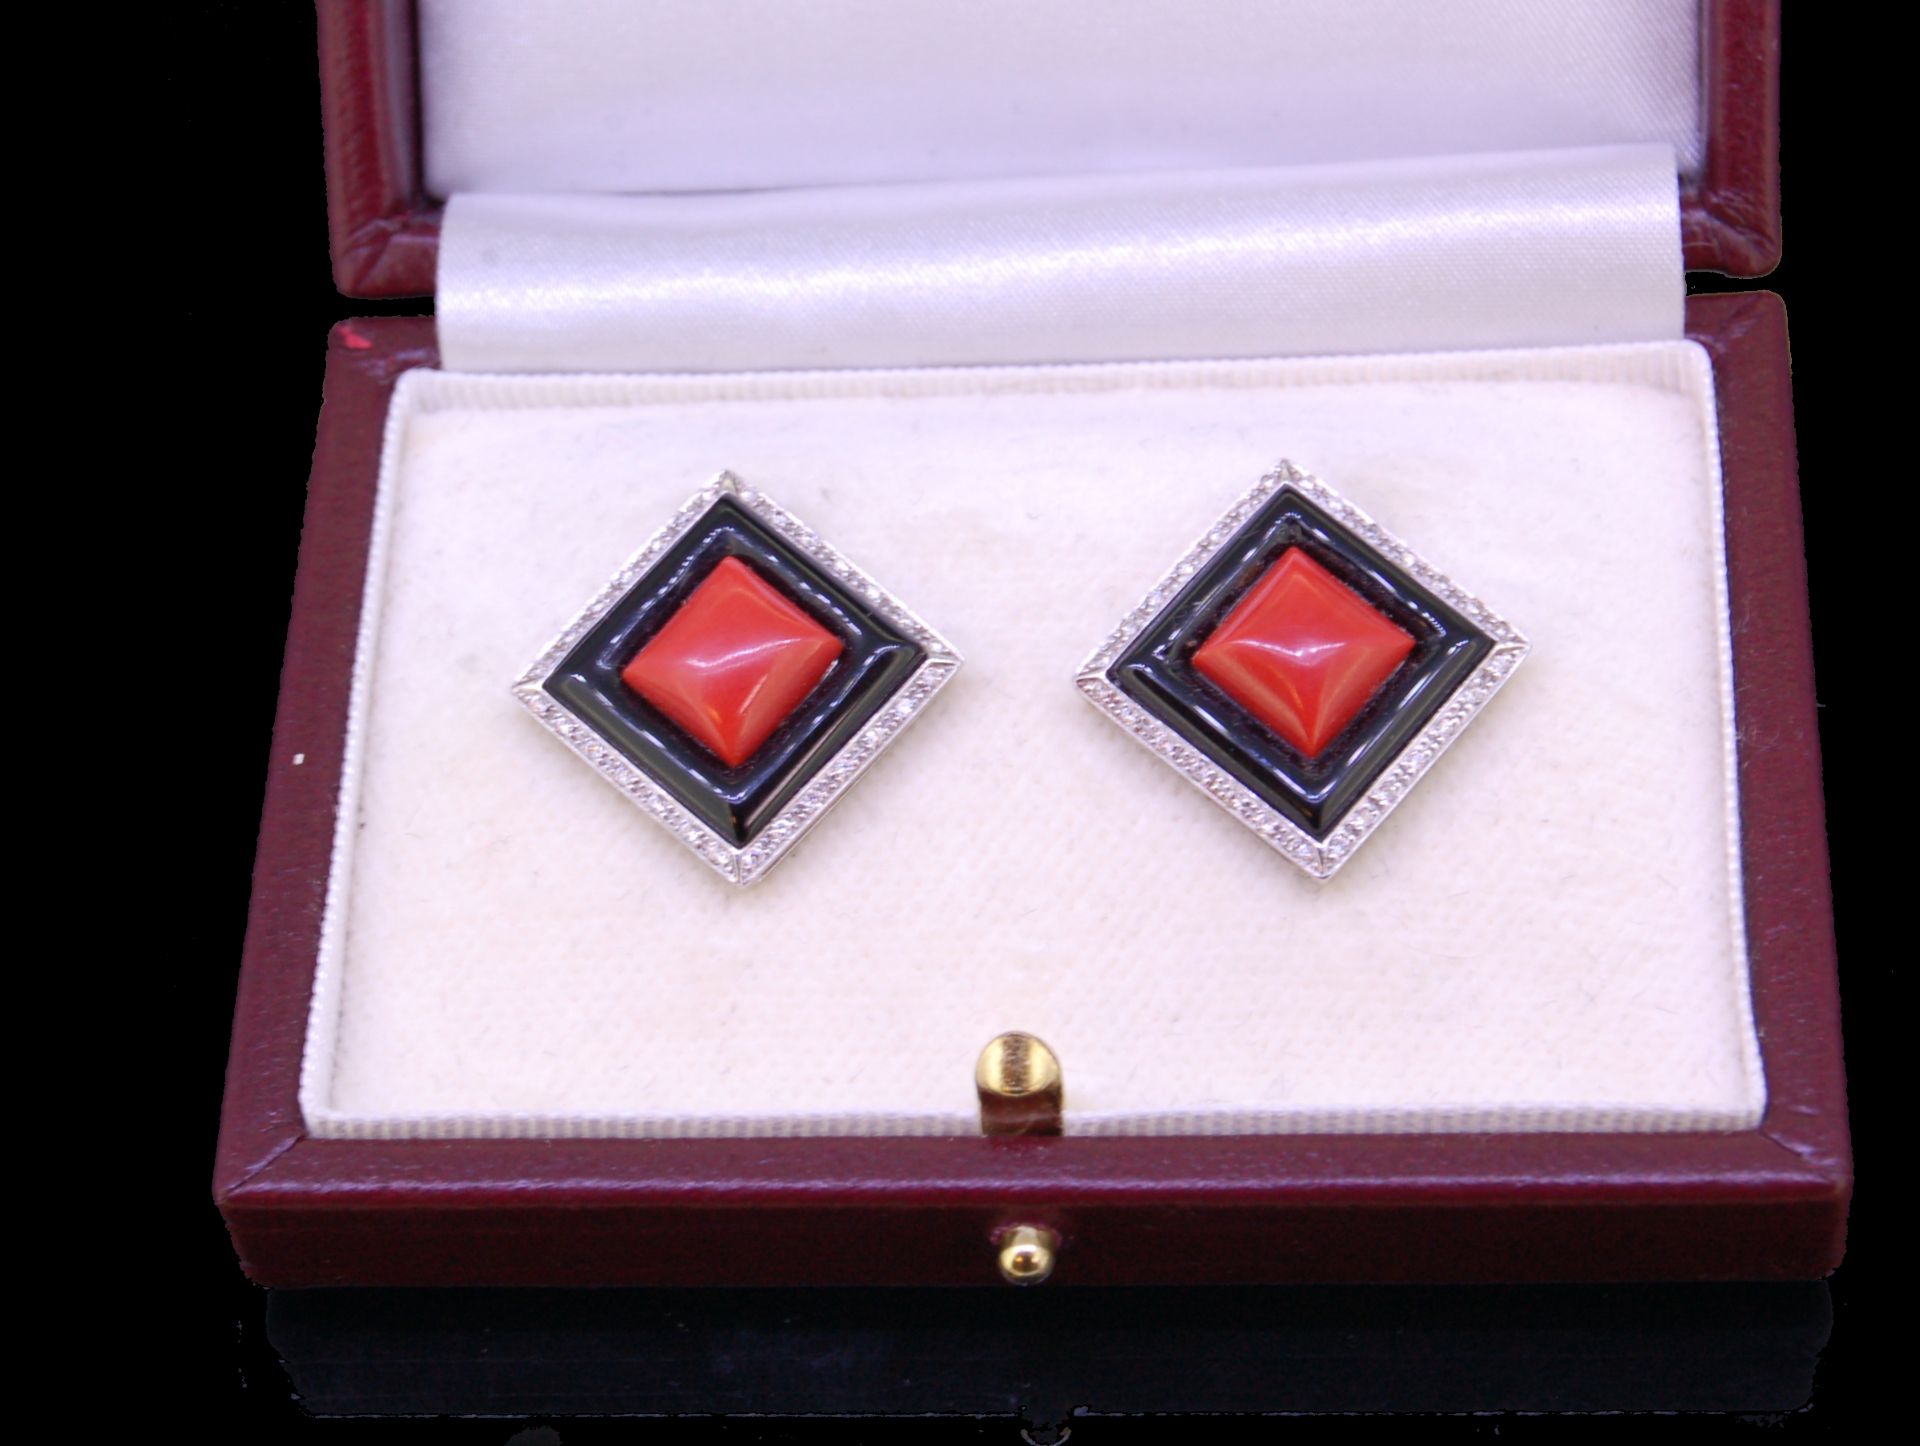 PAIR OF CORAL, ONYX AND DIAMOND EARRINGS - Image 5 of 5